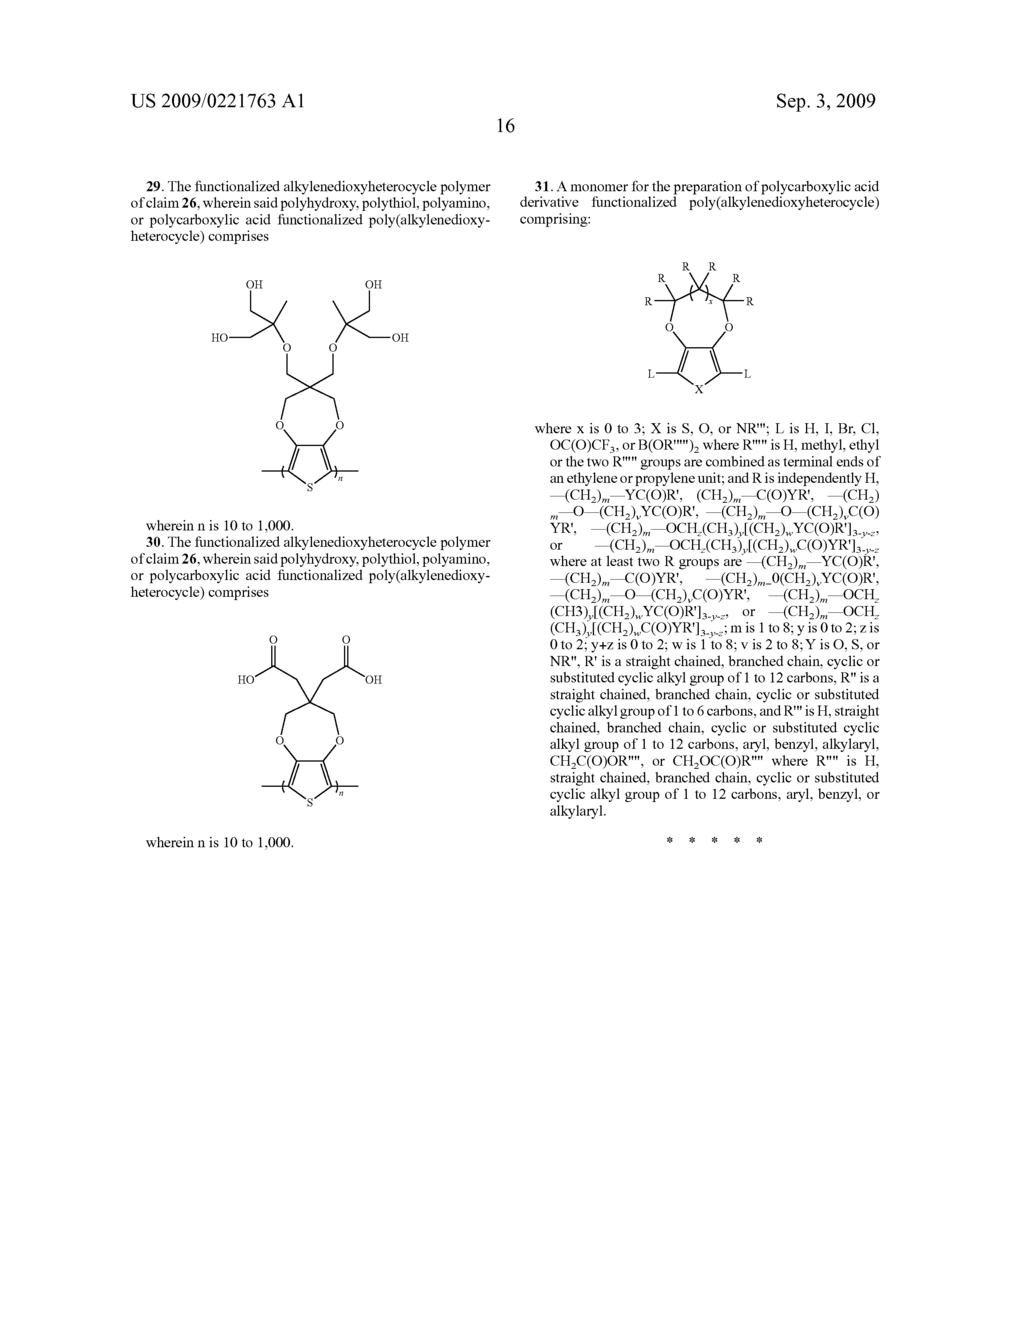 Chemical Defunctionalization of Polymeric Alkylenedioxyheterocyclics - diagram, schematic, and image 28